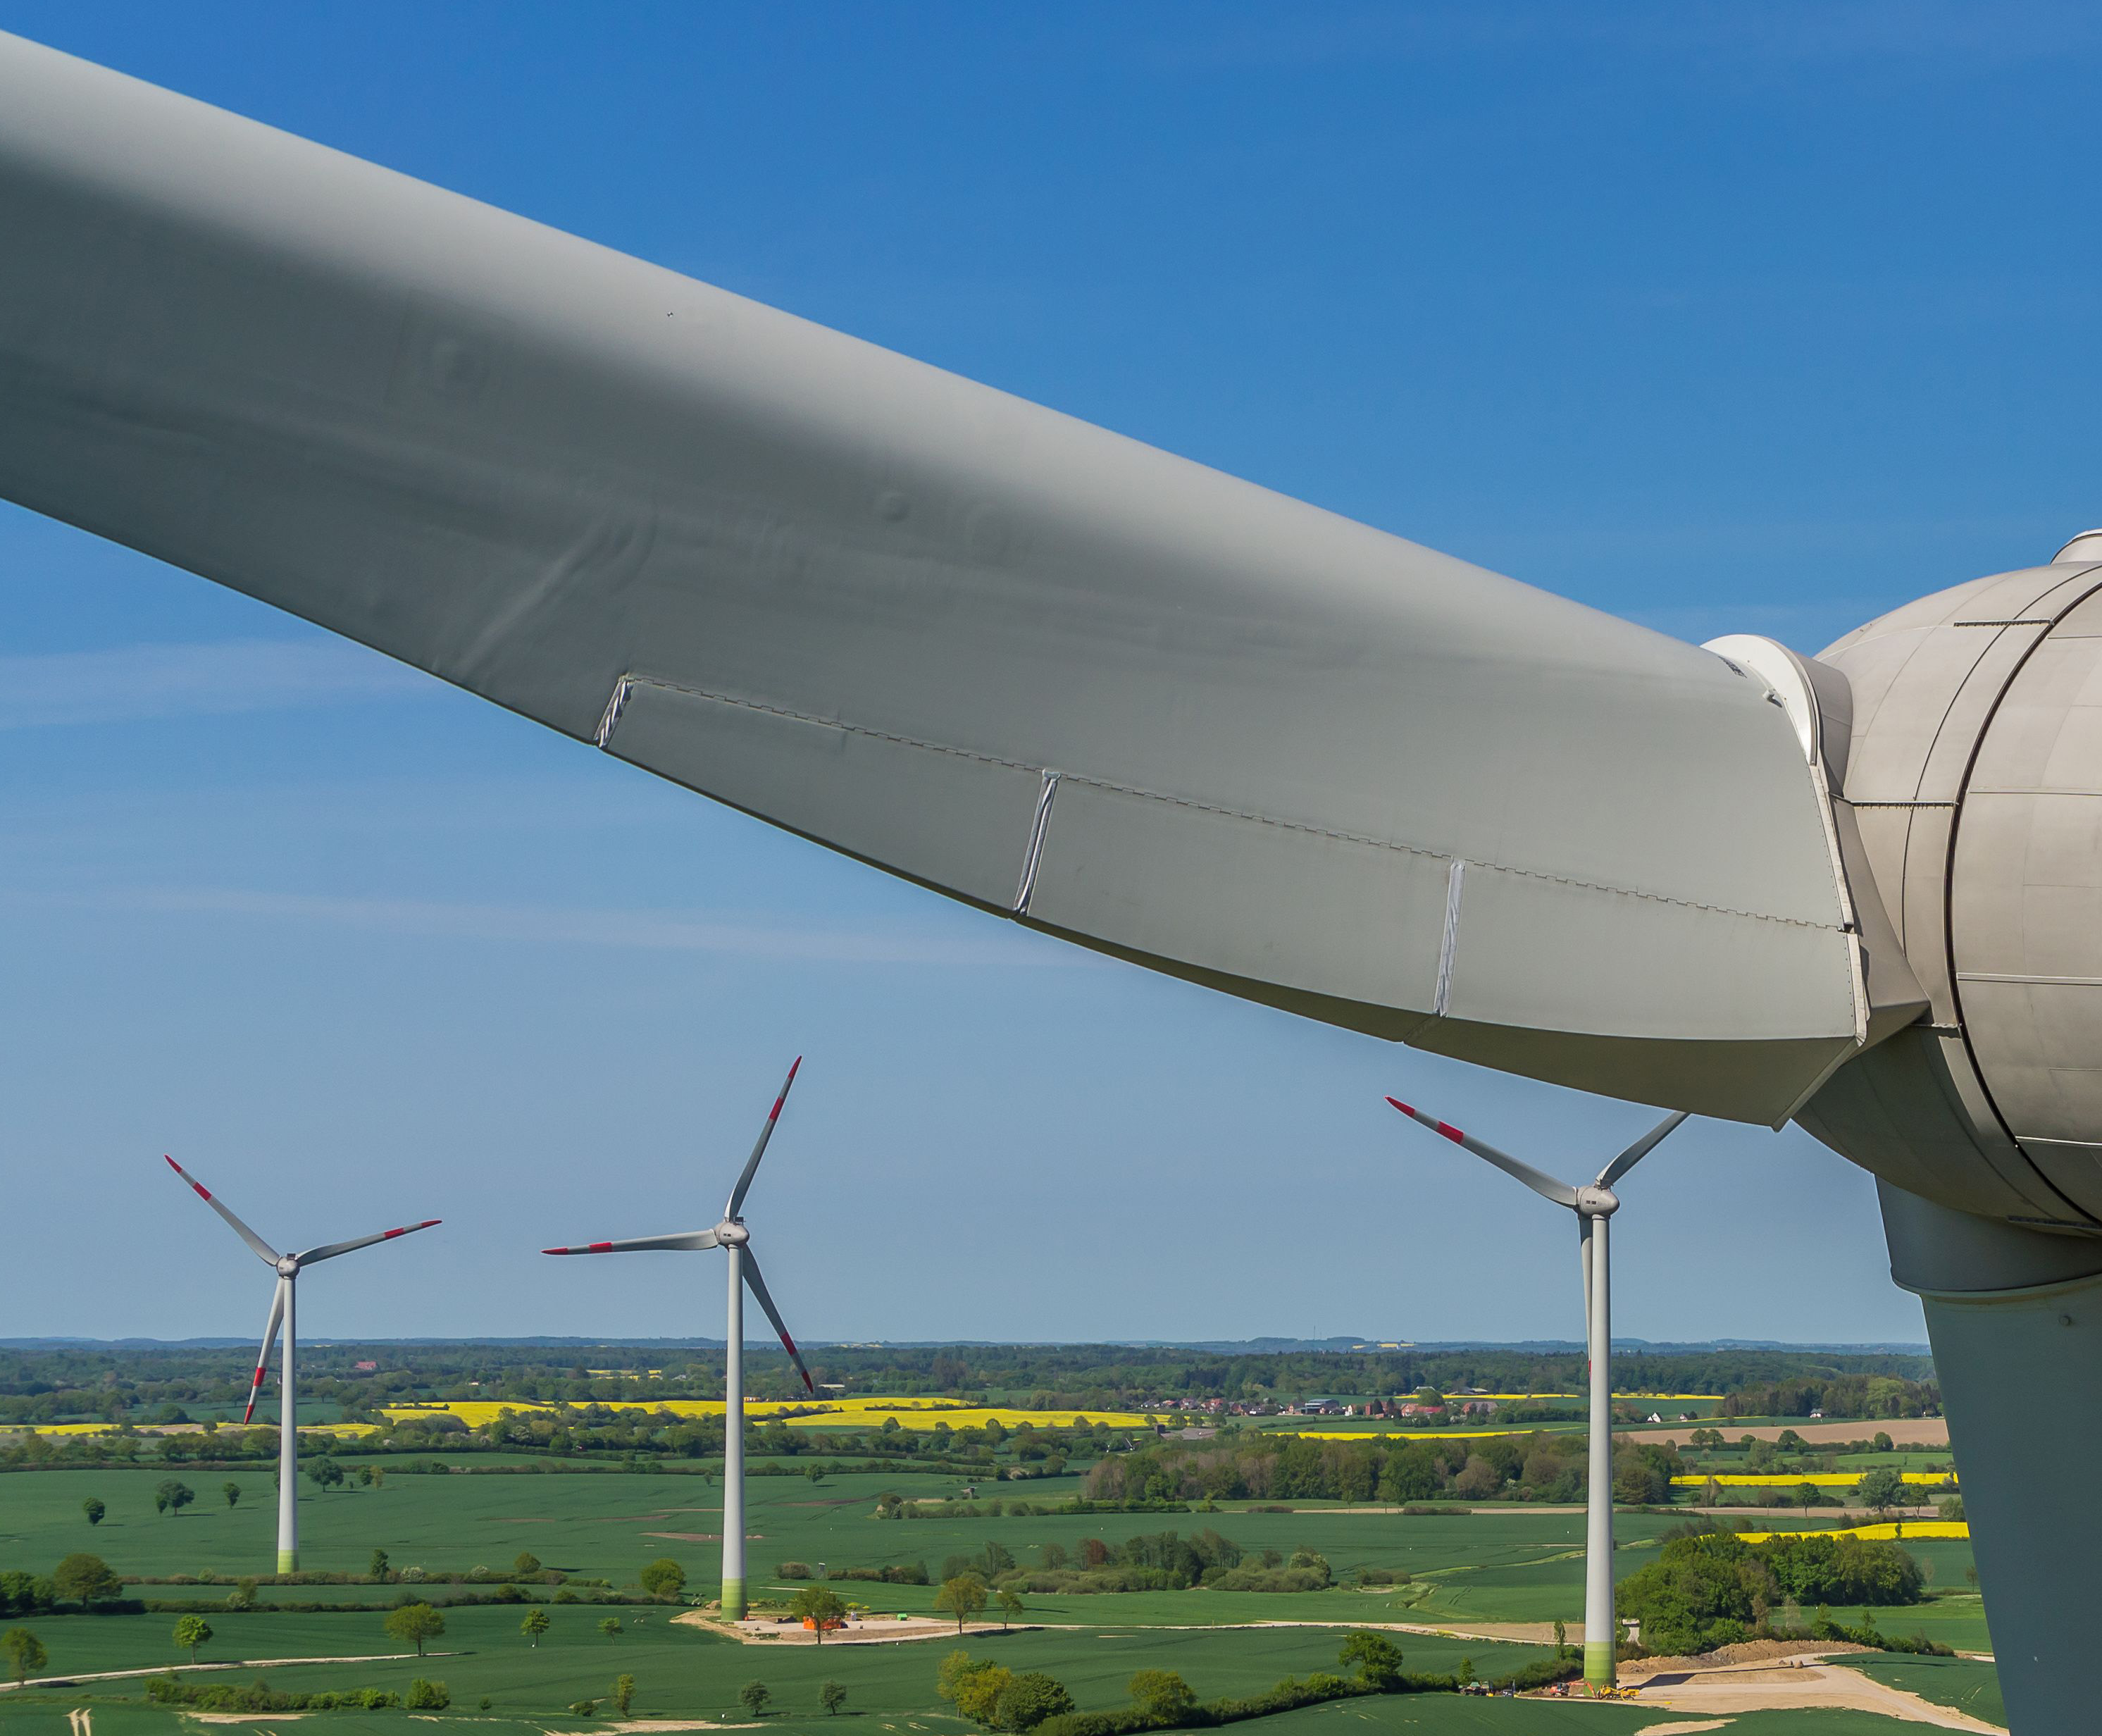 The innovative radar scanner from Fraunhofer IAF enables defects in the material composition of the wind turbine blades to be detected with significantly greater accuracy. This cuts production and operating costs.